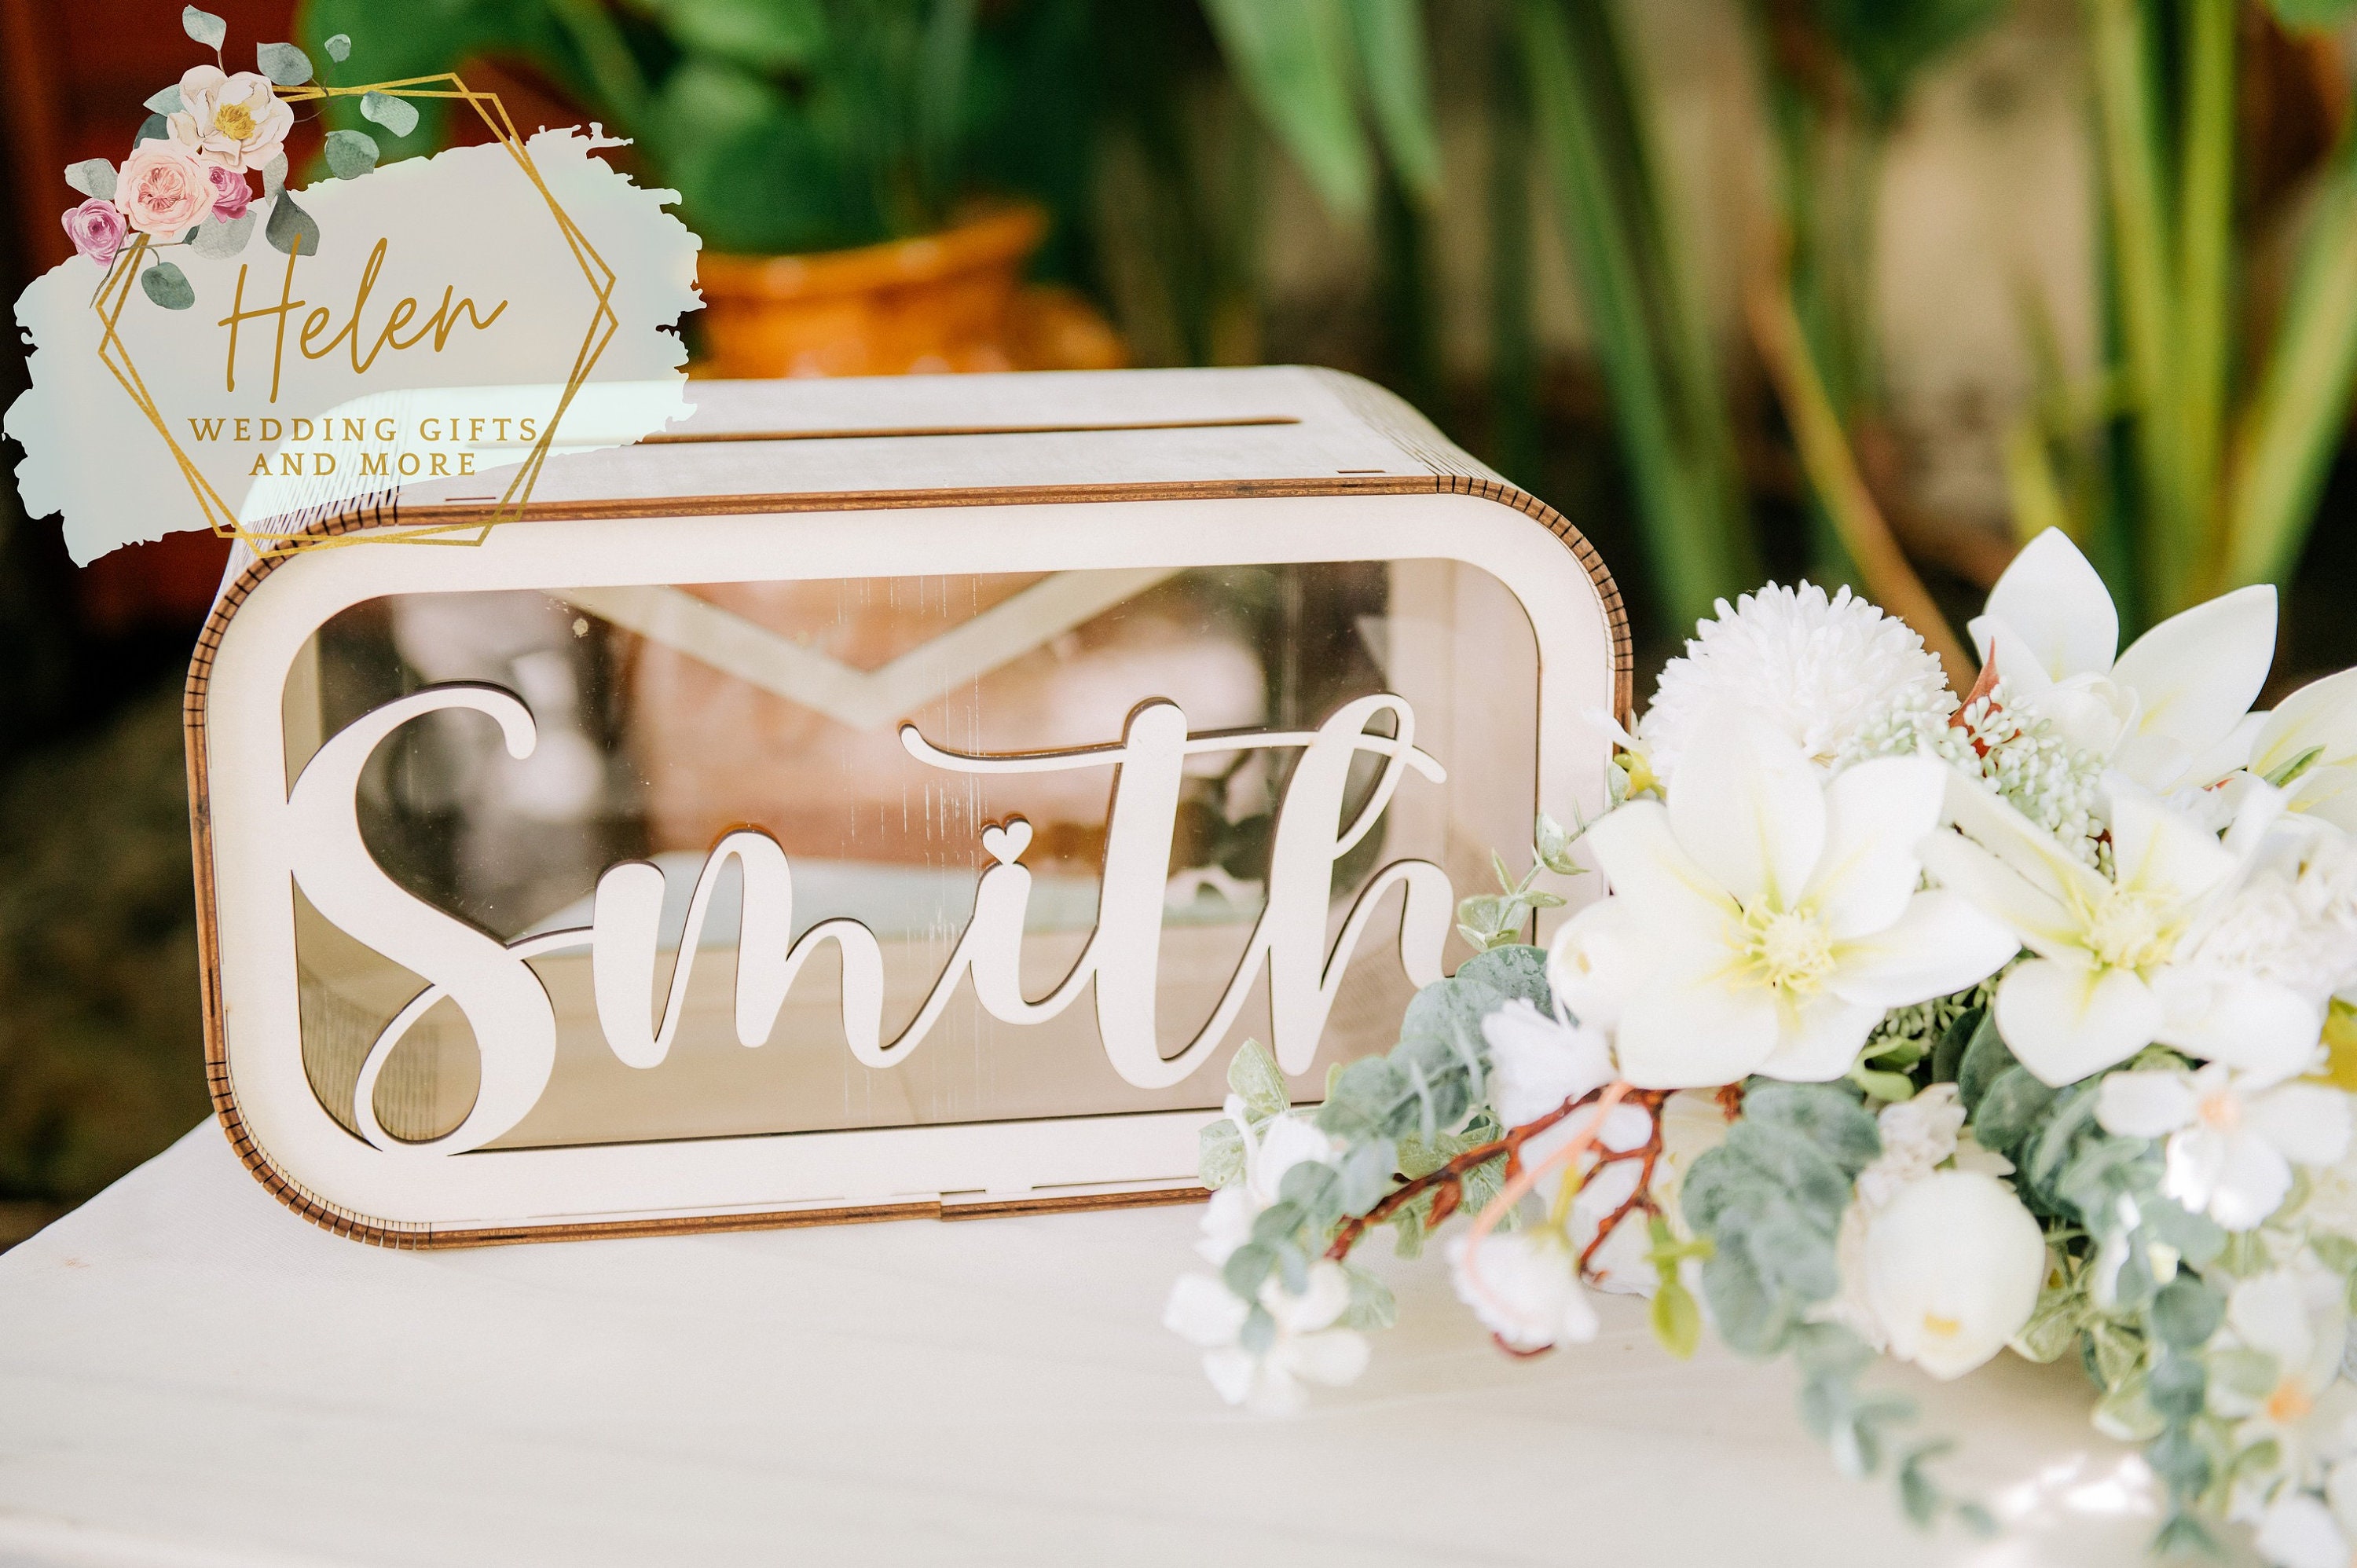 Mr & Mrs Unique Wooden Wedding Card Box with Water Color Acrylic Sign  CABA004